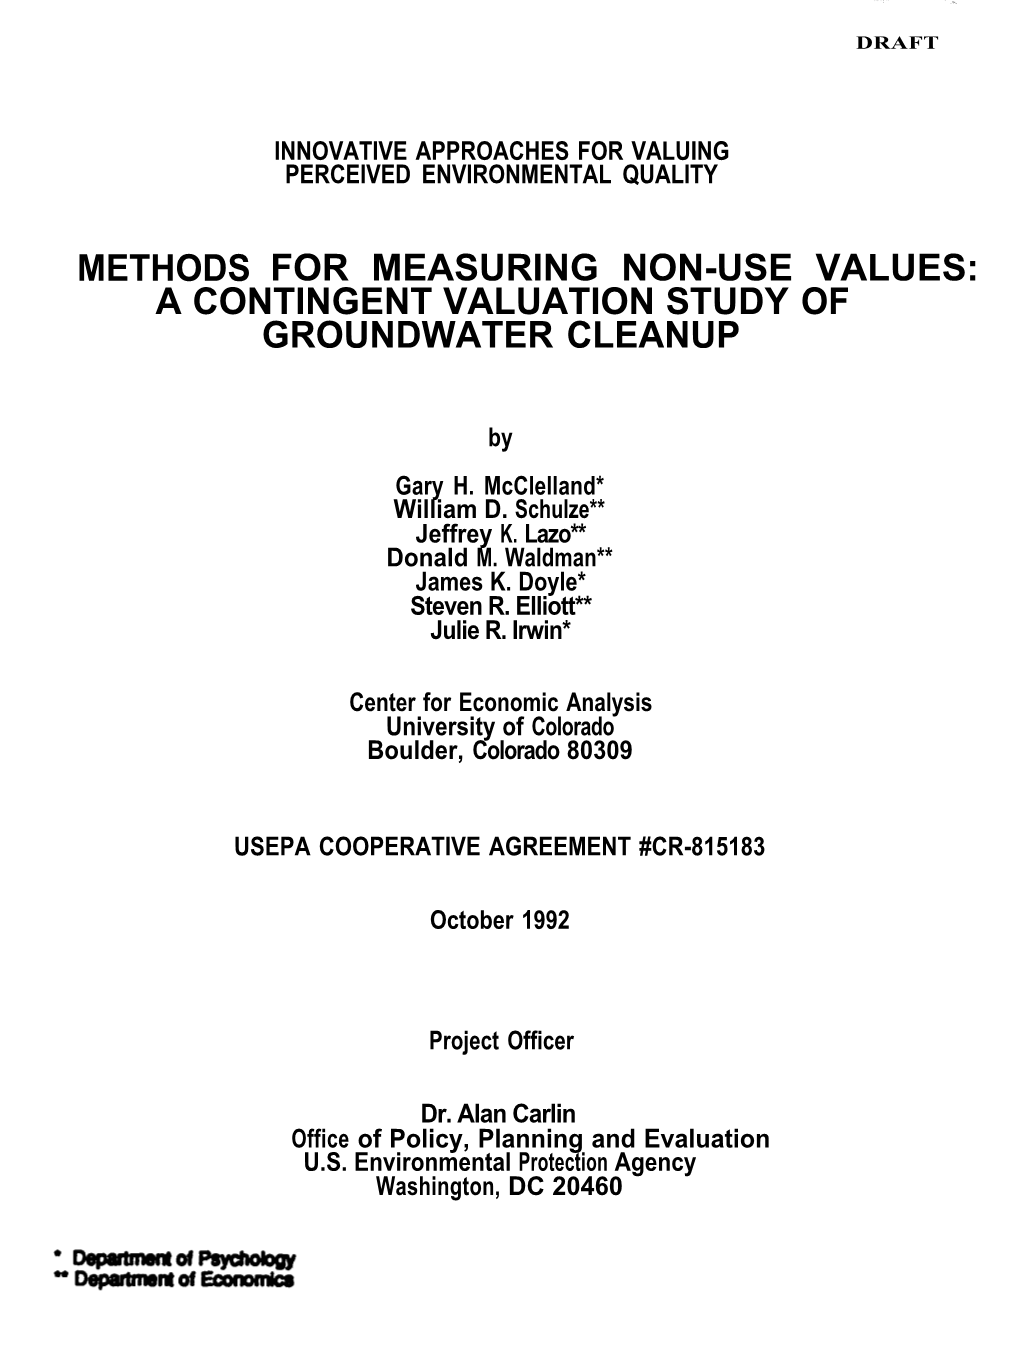 Methods for Measuring Non-Use Values: a Contingent Valuation Study of Groundwater Cleanup